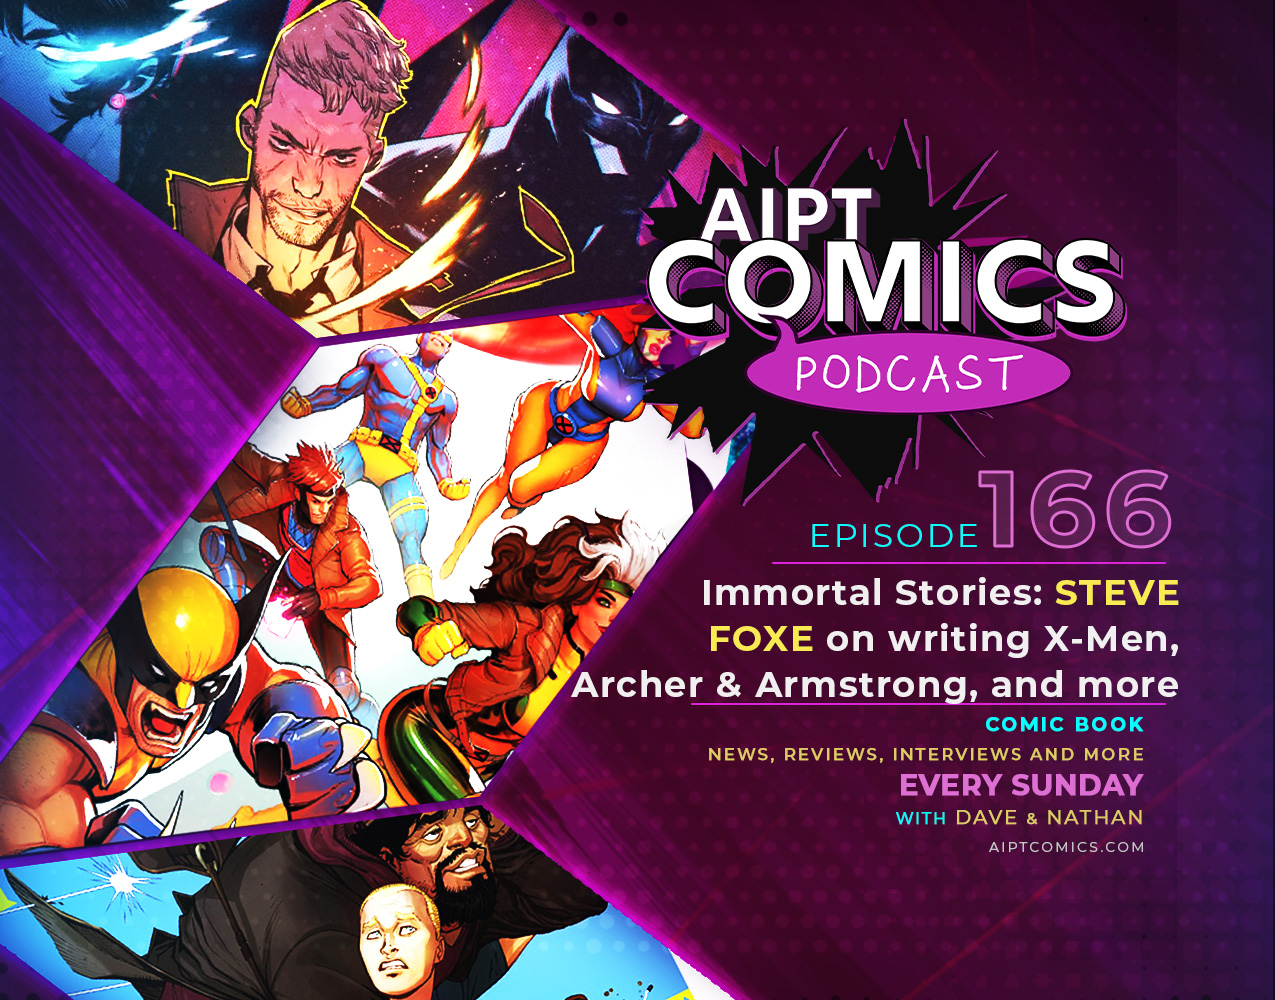 AIPT Comics podcast episode 166: Immortal Stories: Steve Foxe on writing X-Men, Archer & Armstrong, and more